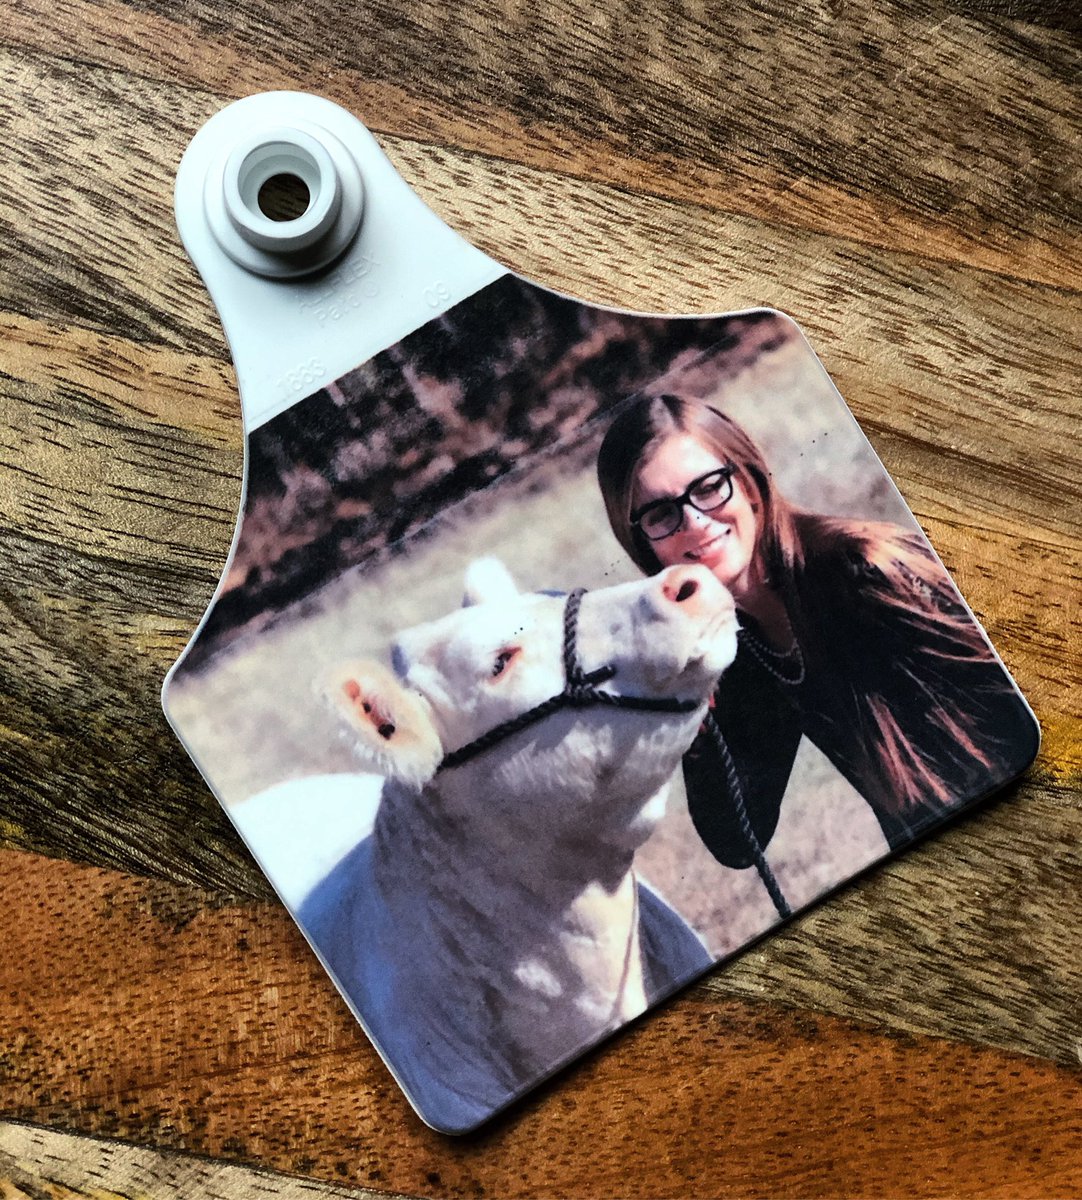 New product; Portrait Tags!

Portrait tags make for a unique way to capture a memory. These make great gifts, ornaments, keychains, and more! Order at goneroguedesign.com 

#customeartags #cattle #showcattle #stockshow #stockshowlife #clubcalves #showheifer #showsteer